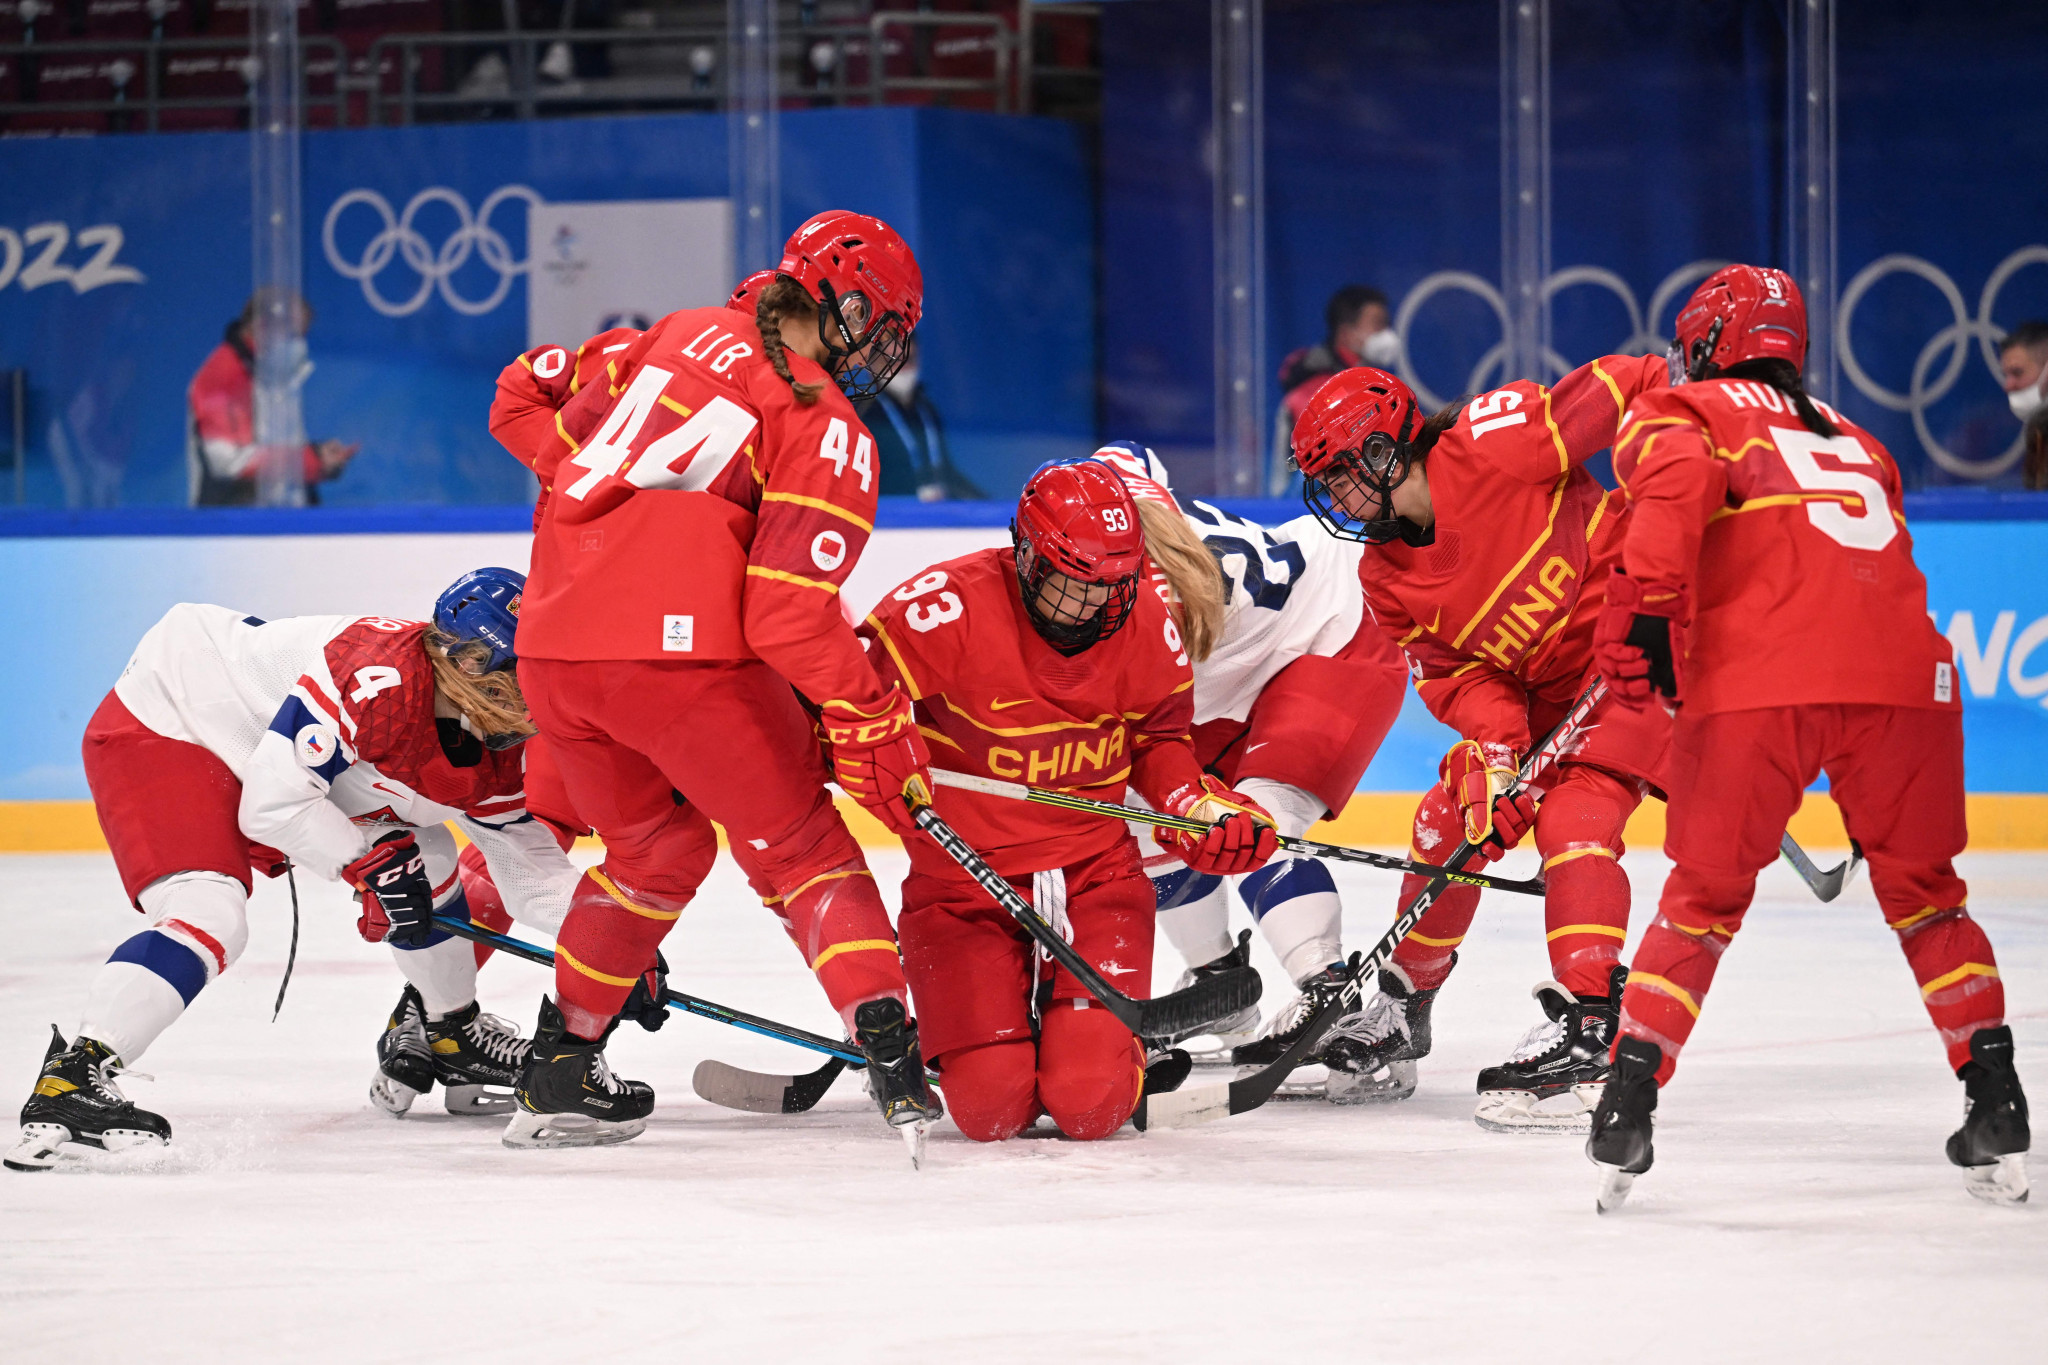 Three-year contract for IIHF events in China approved by Semi-Annual Congress